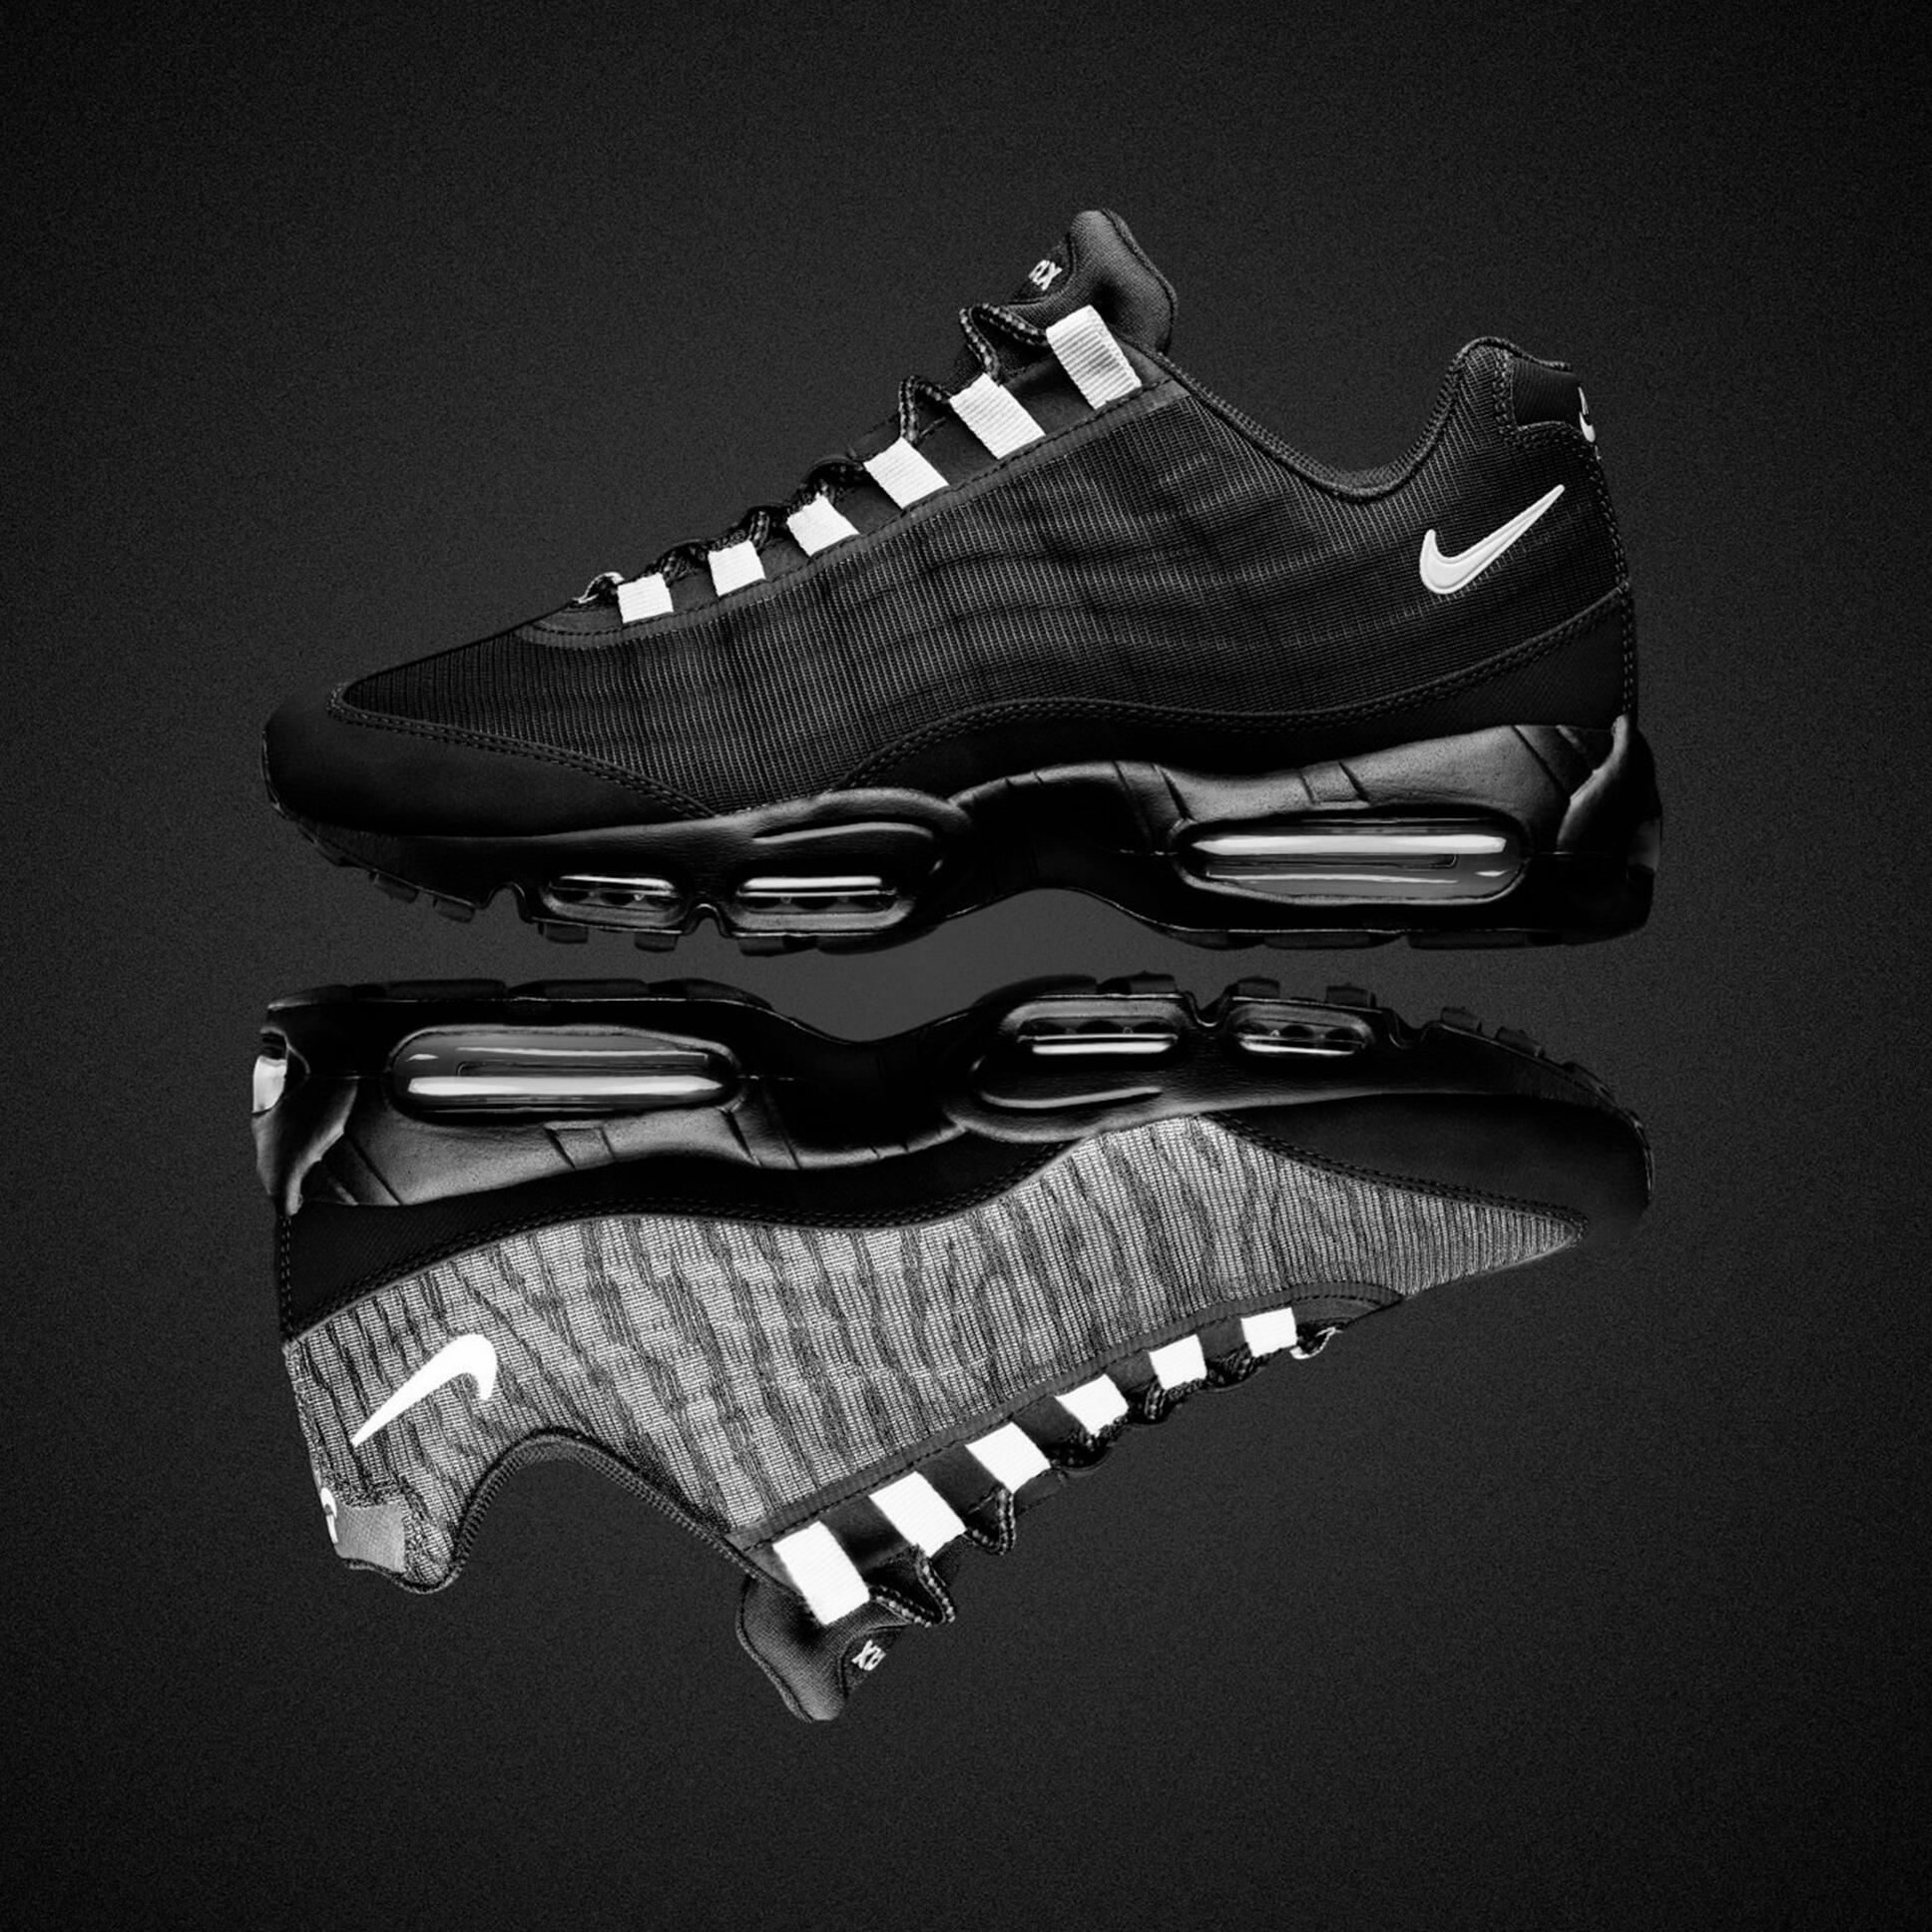 Footaction on Twitter: a look at the new Nike Max Premium Tape Reflective available now. More here. http://t.co/iFickImdB8 http://t.co/NlFWVfYhBH" / Twitter